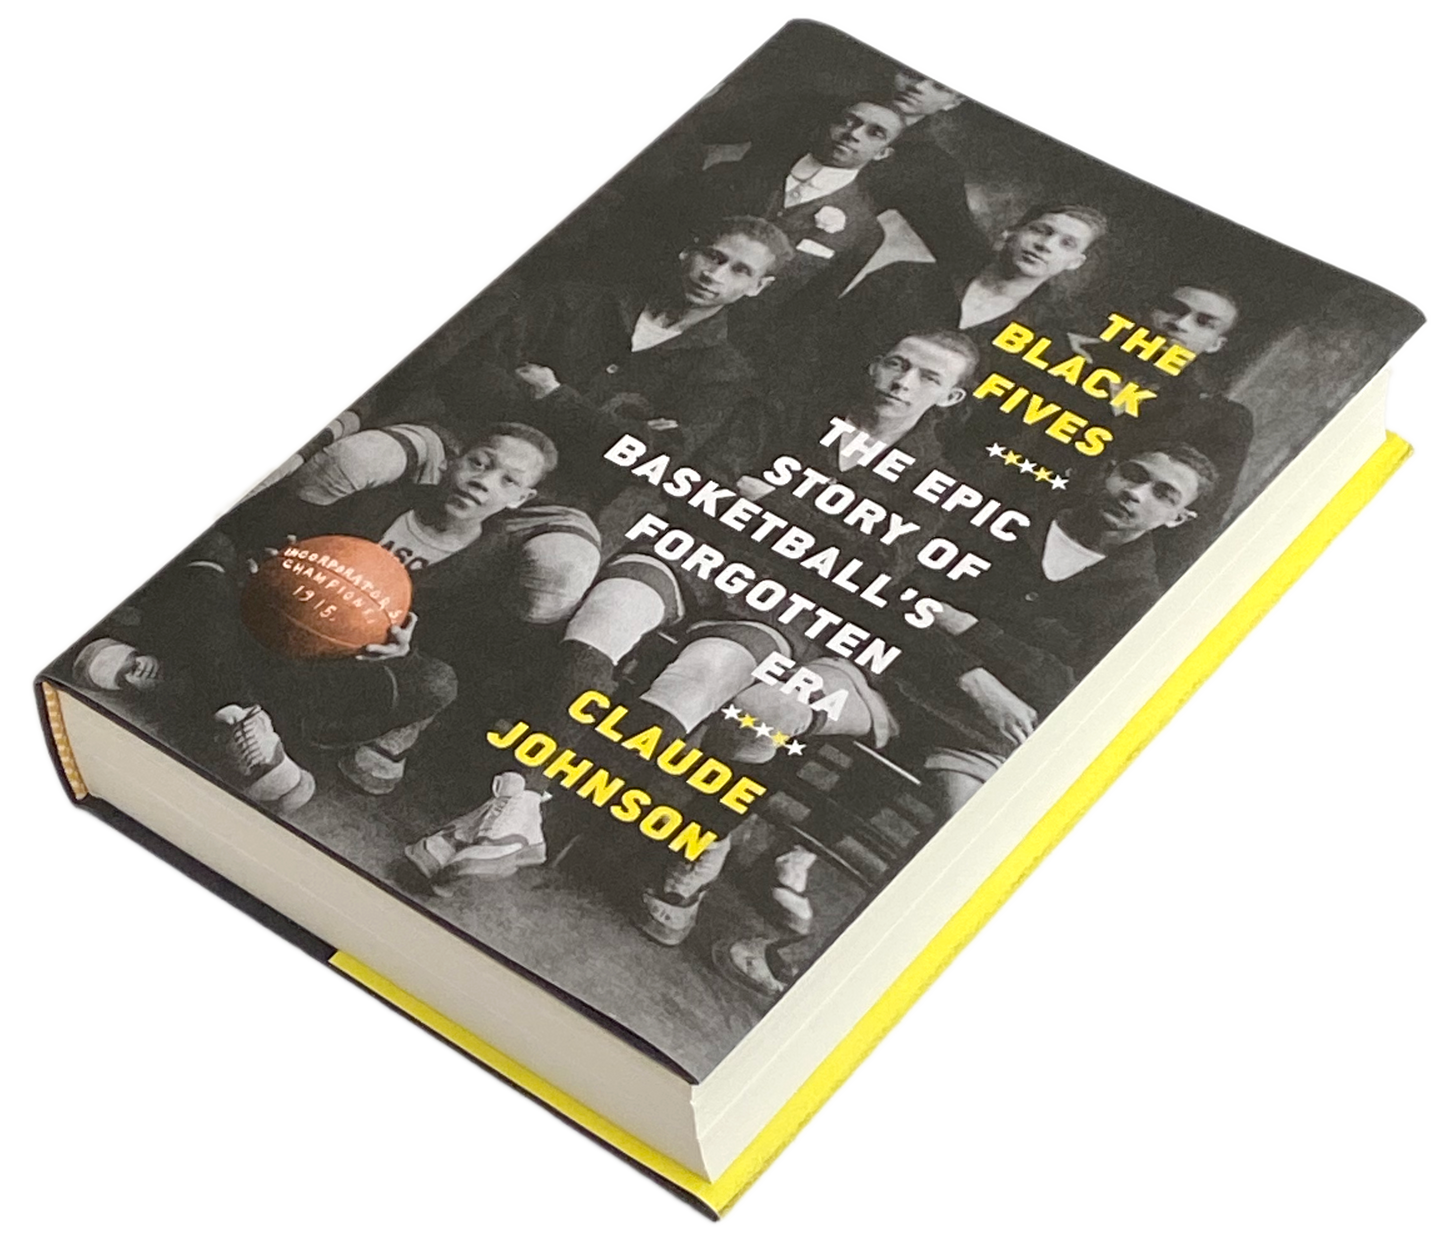 The Black Fives: The Epic Story of Basketball's Forgotten Era, by Claude Johnson (Hardcover)